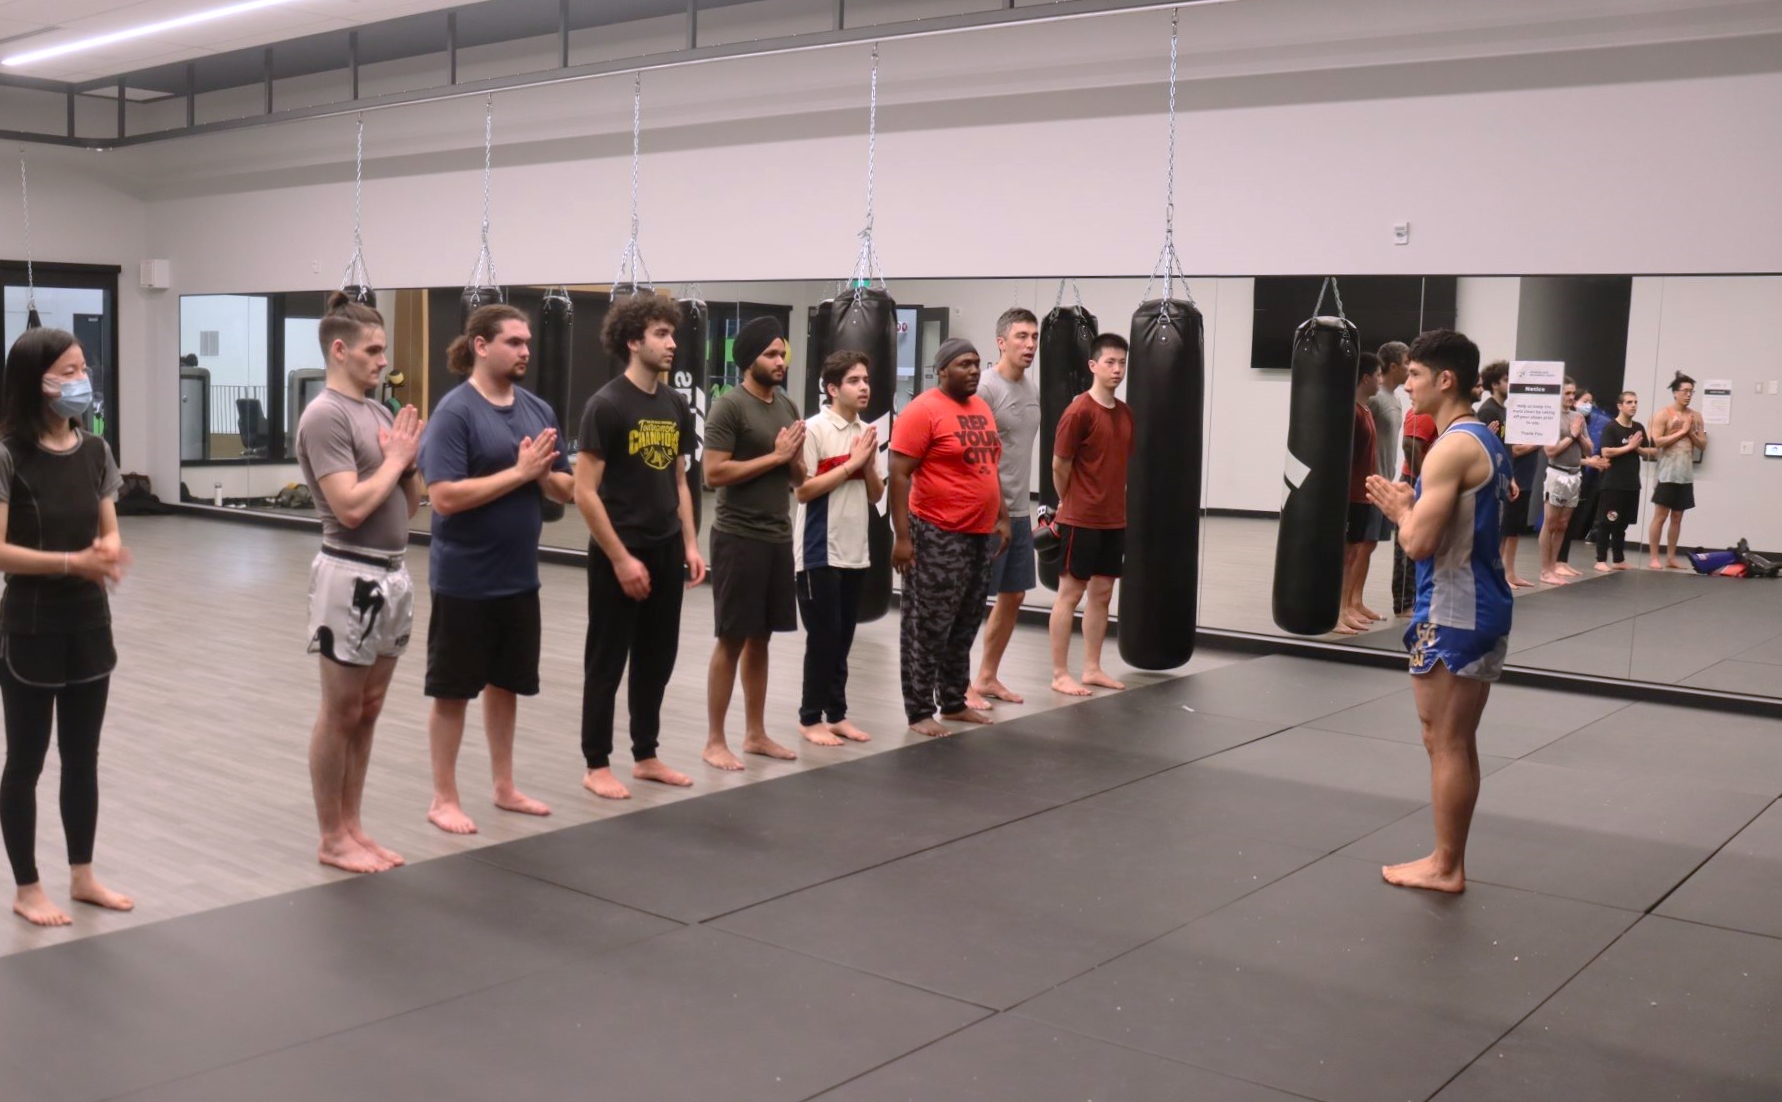 At the end of a class, Muay Thai students pay their respect to their teacher.